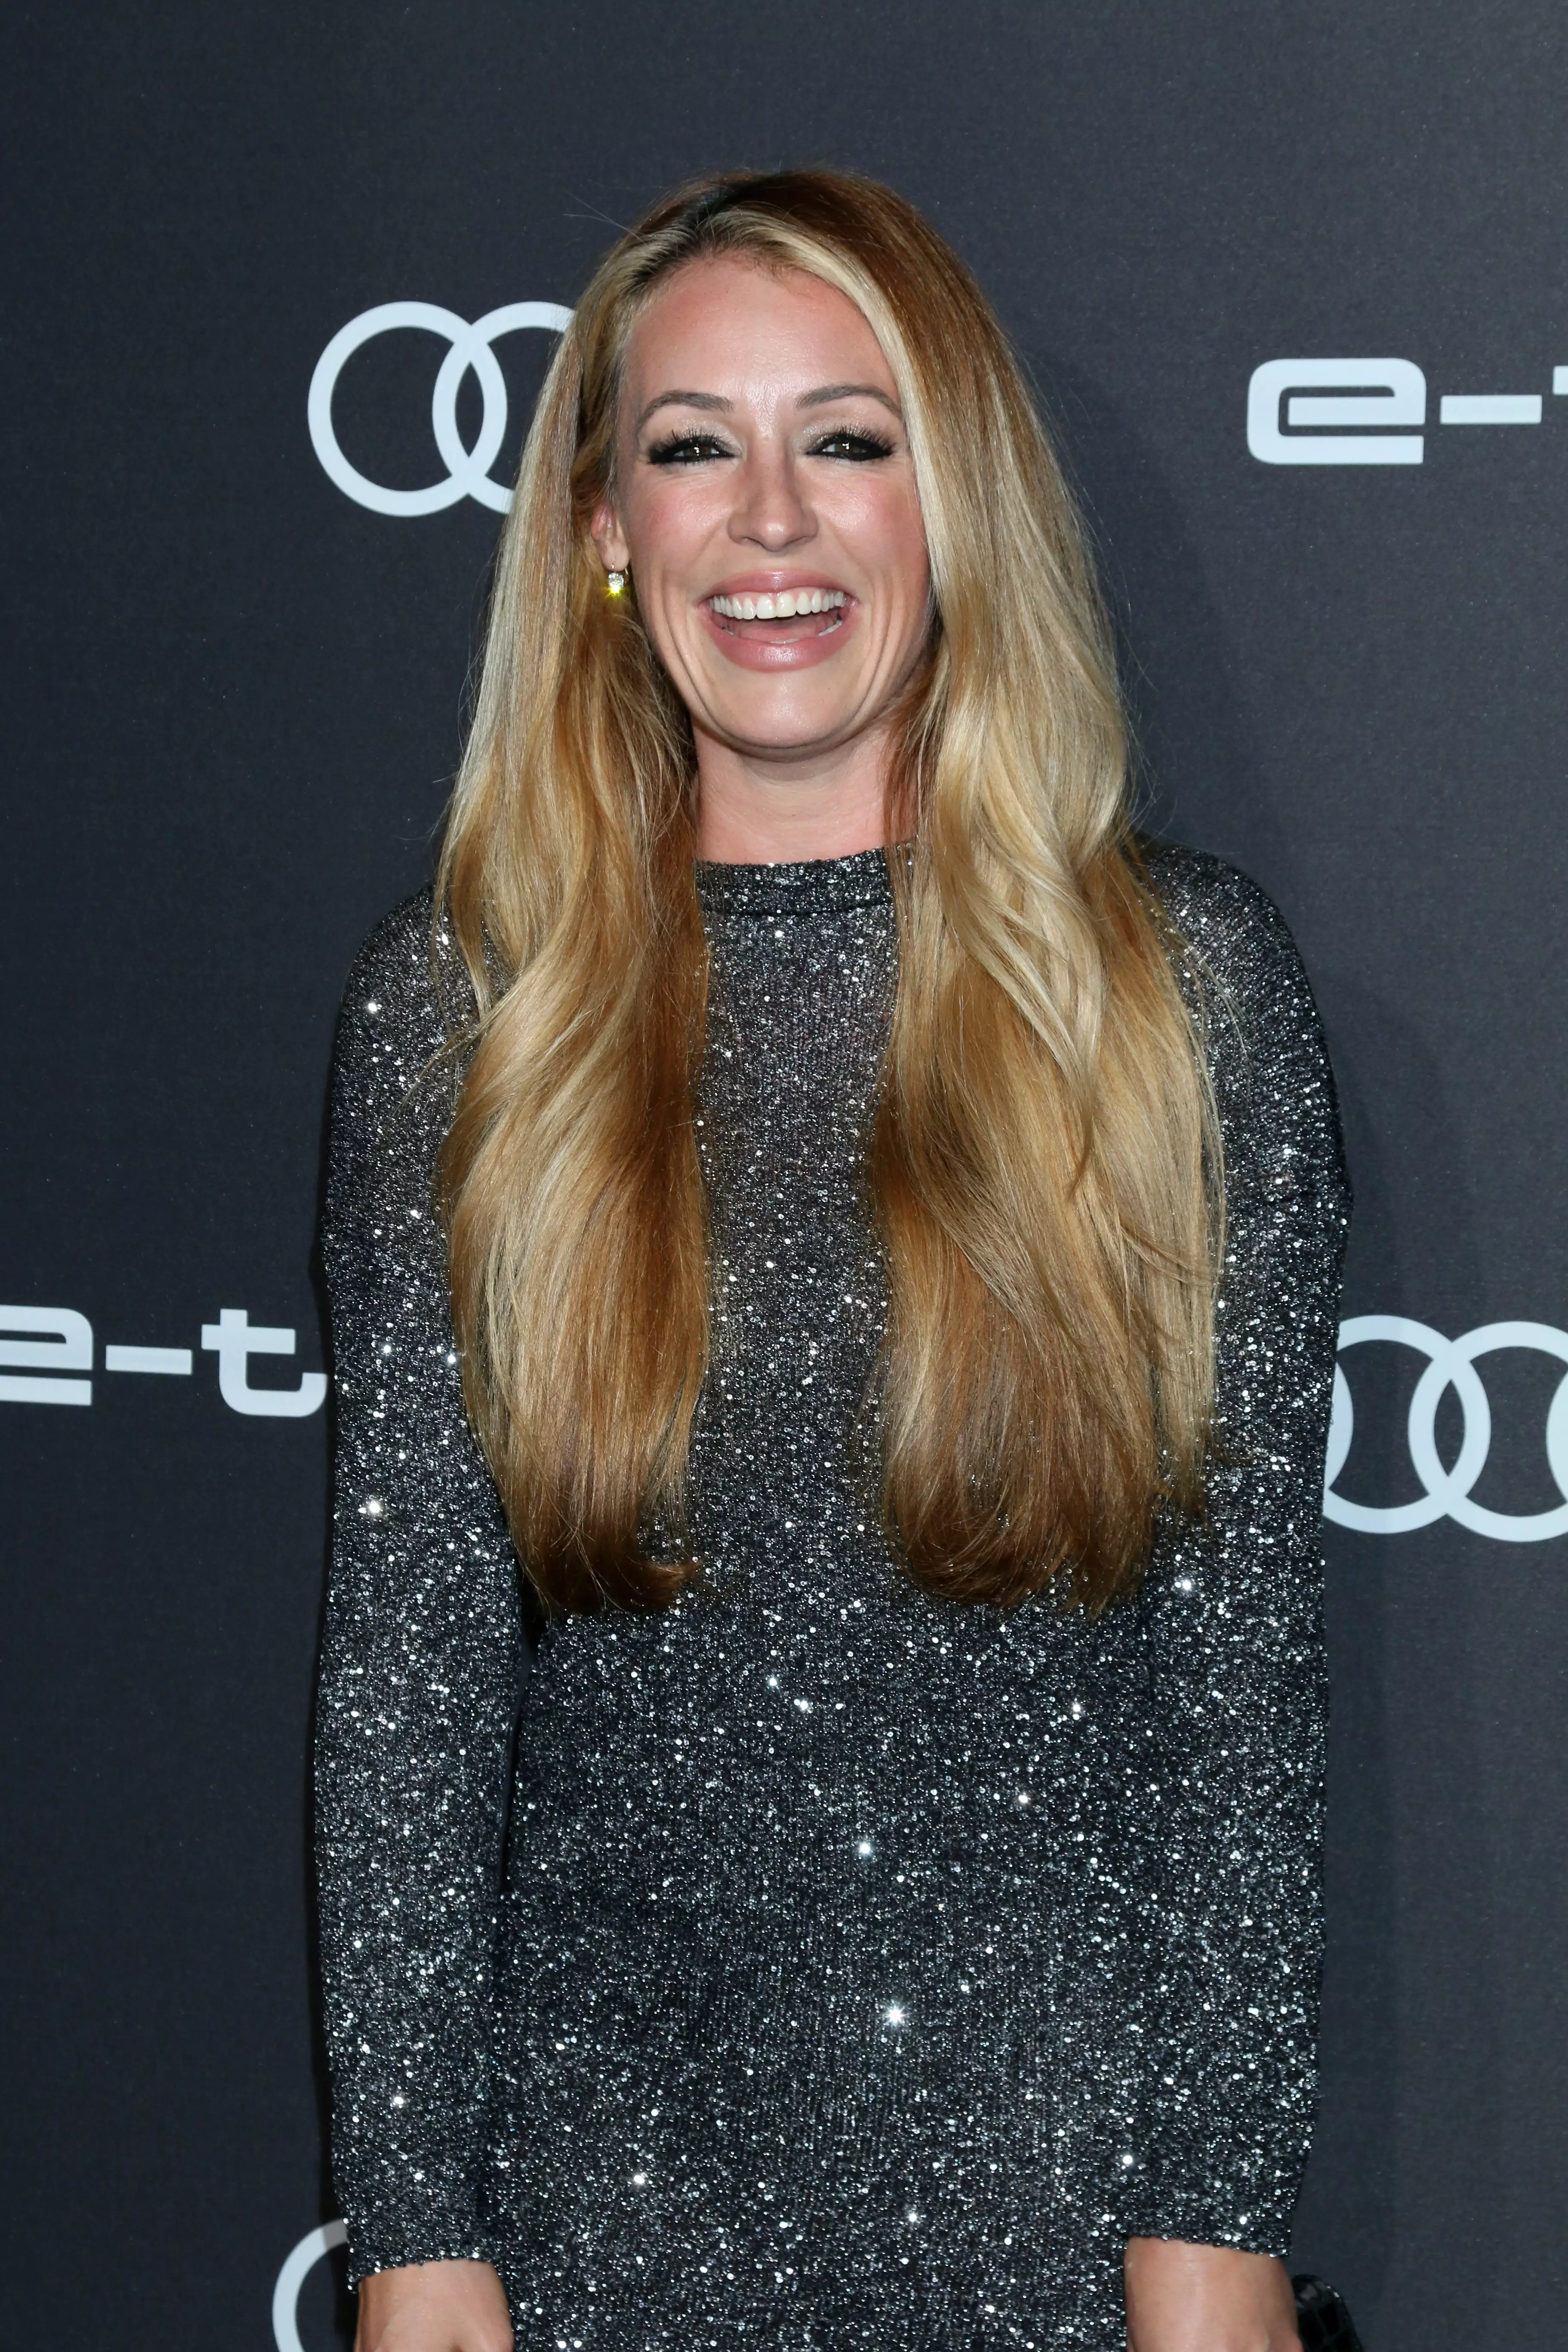 Cat Deeley has said that filming the popular TV show was the most fun they had (